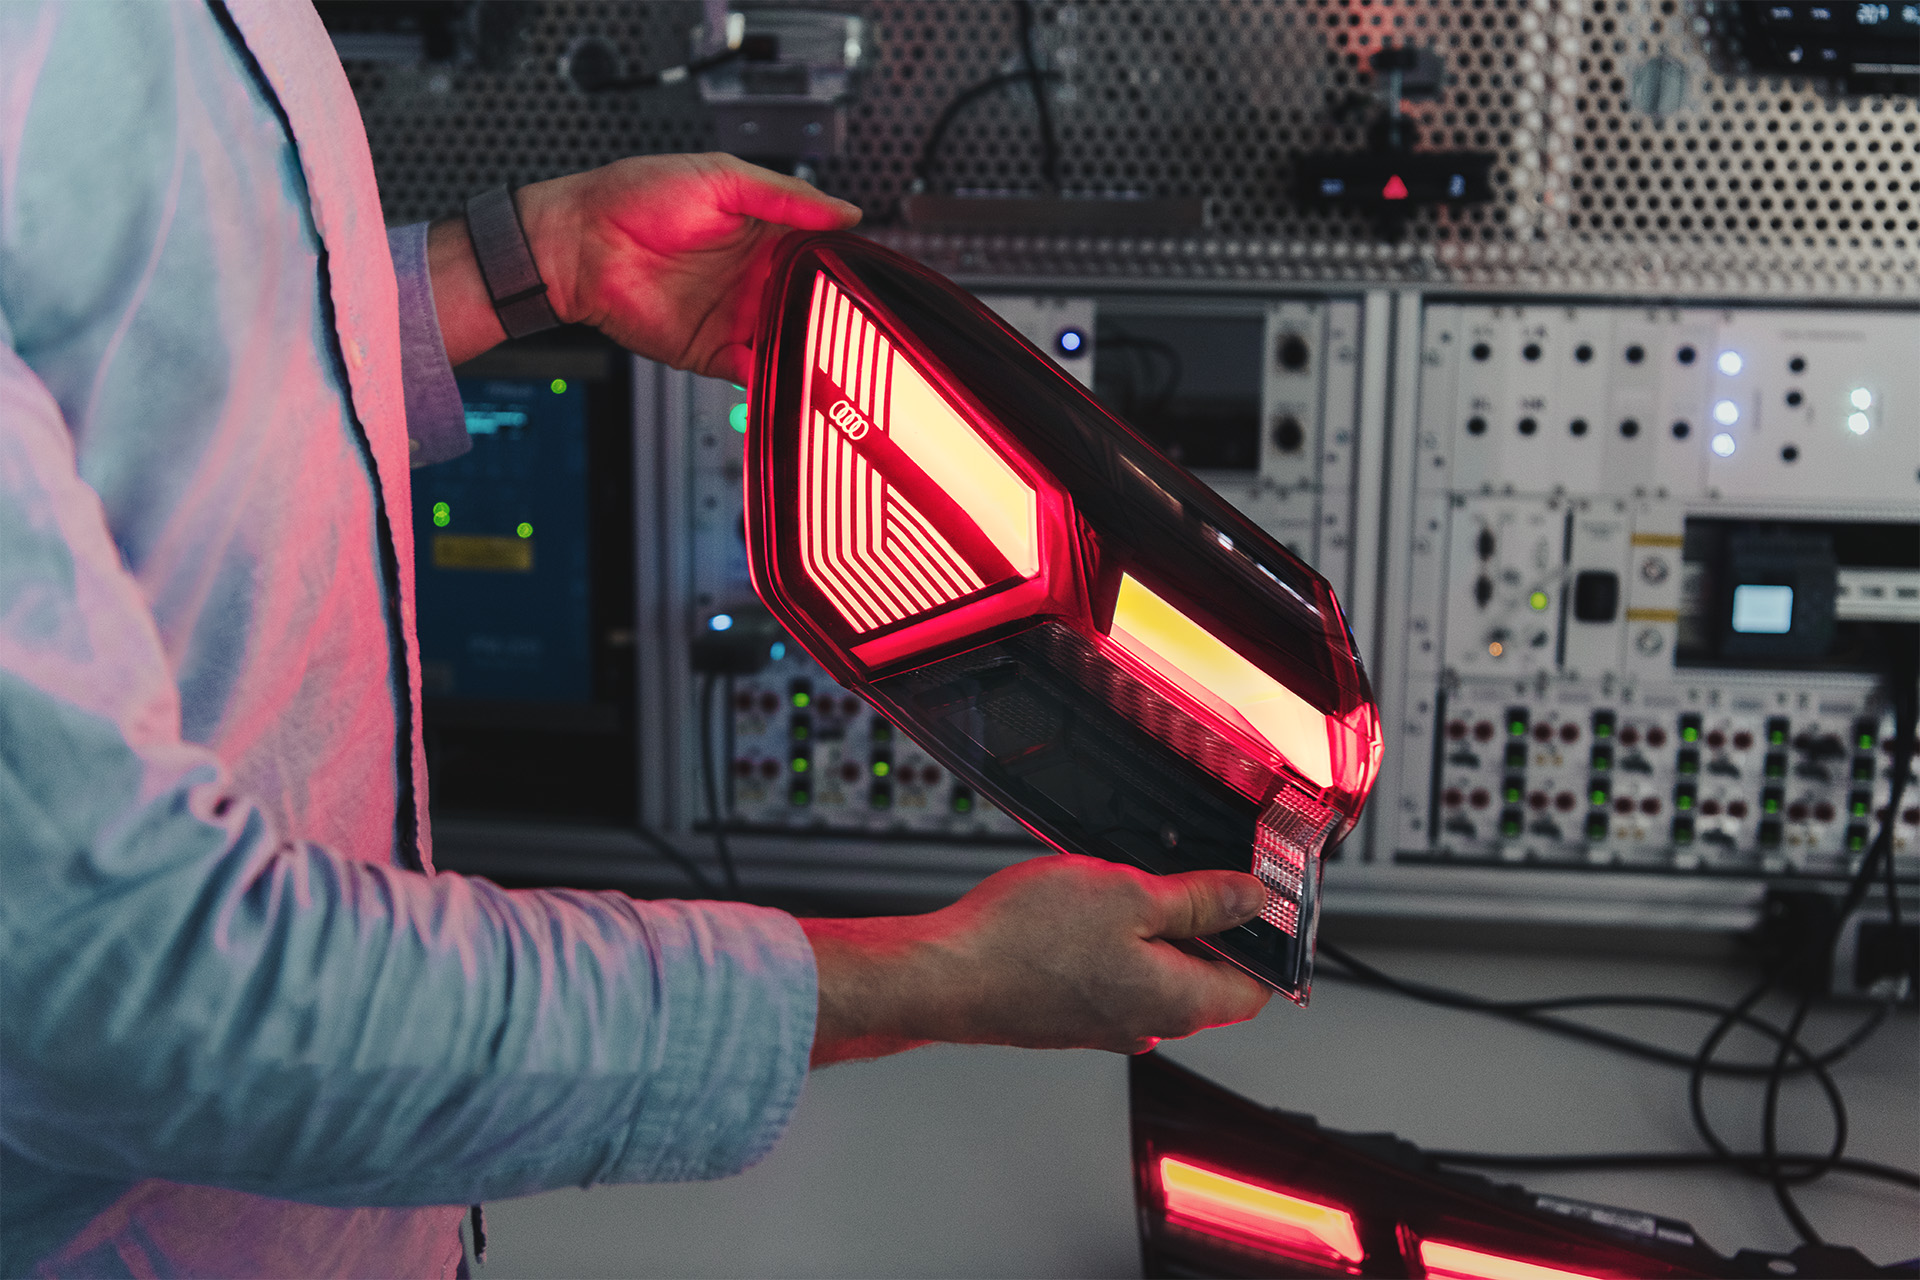 An Audi engineer holding a section of the Audi Q4 e-tron rear light.